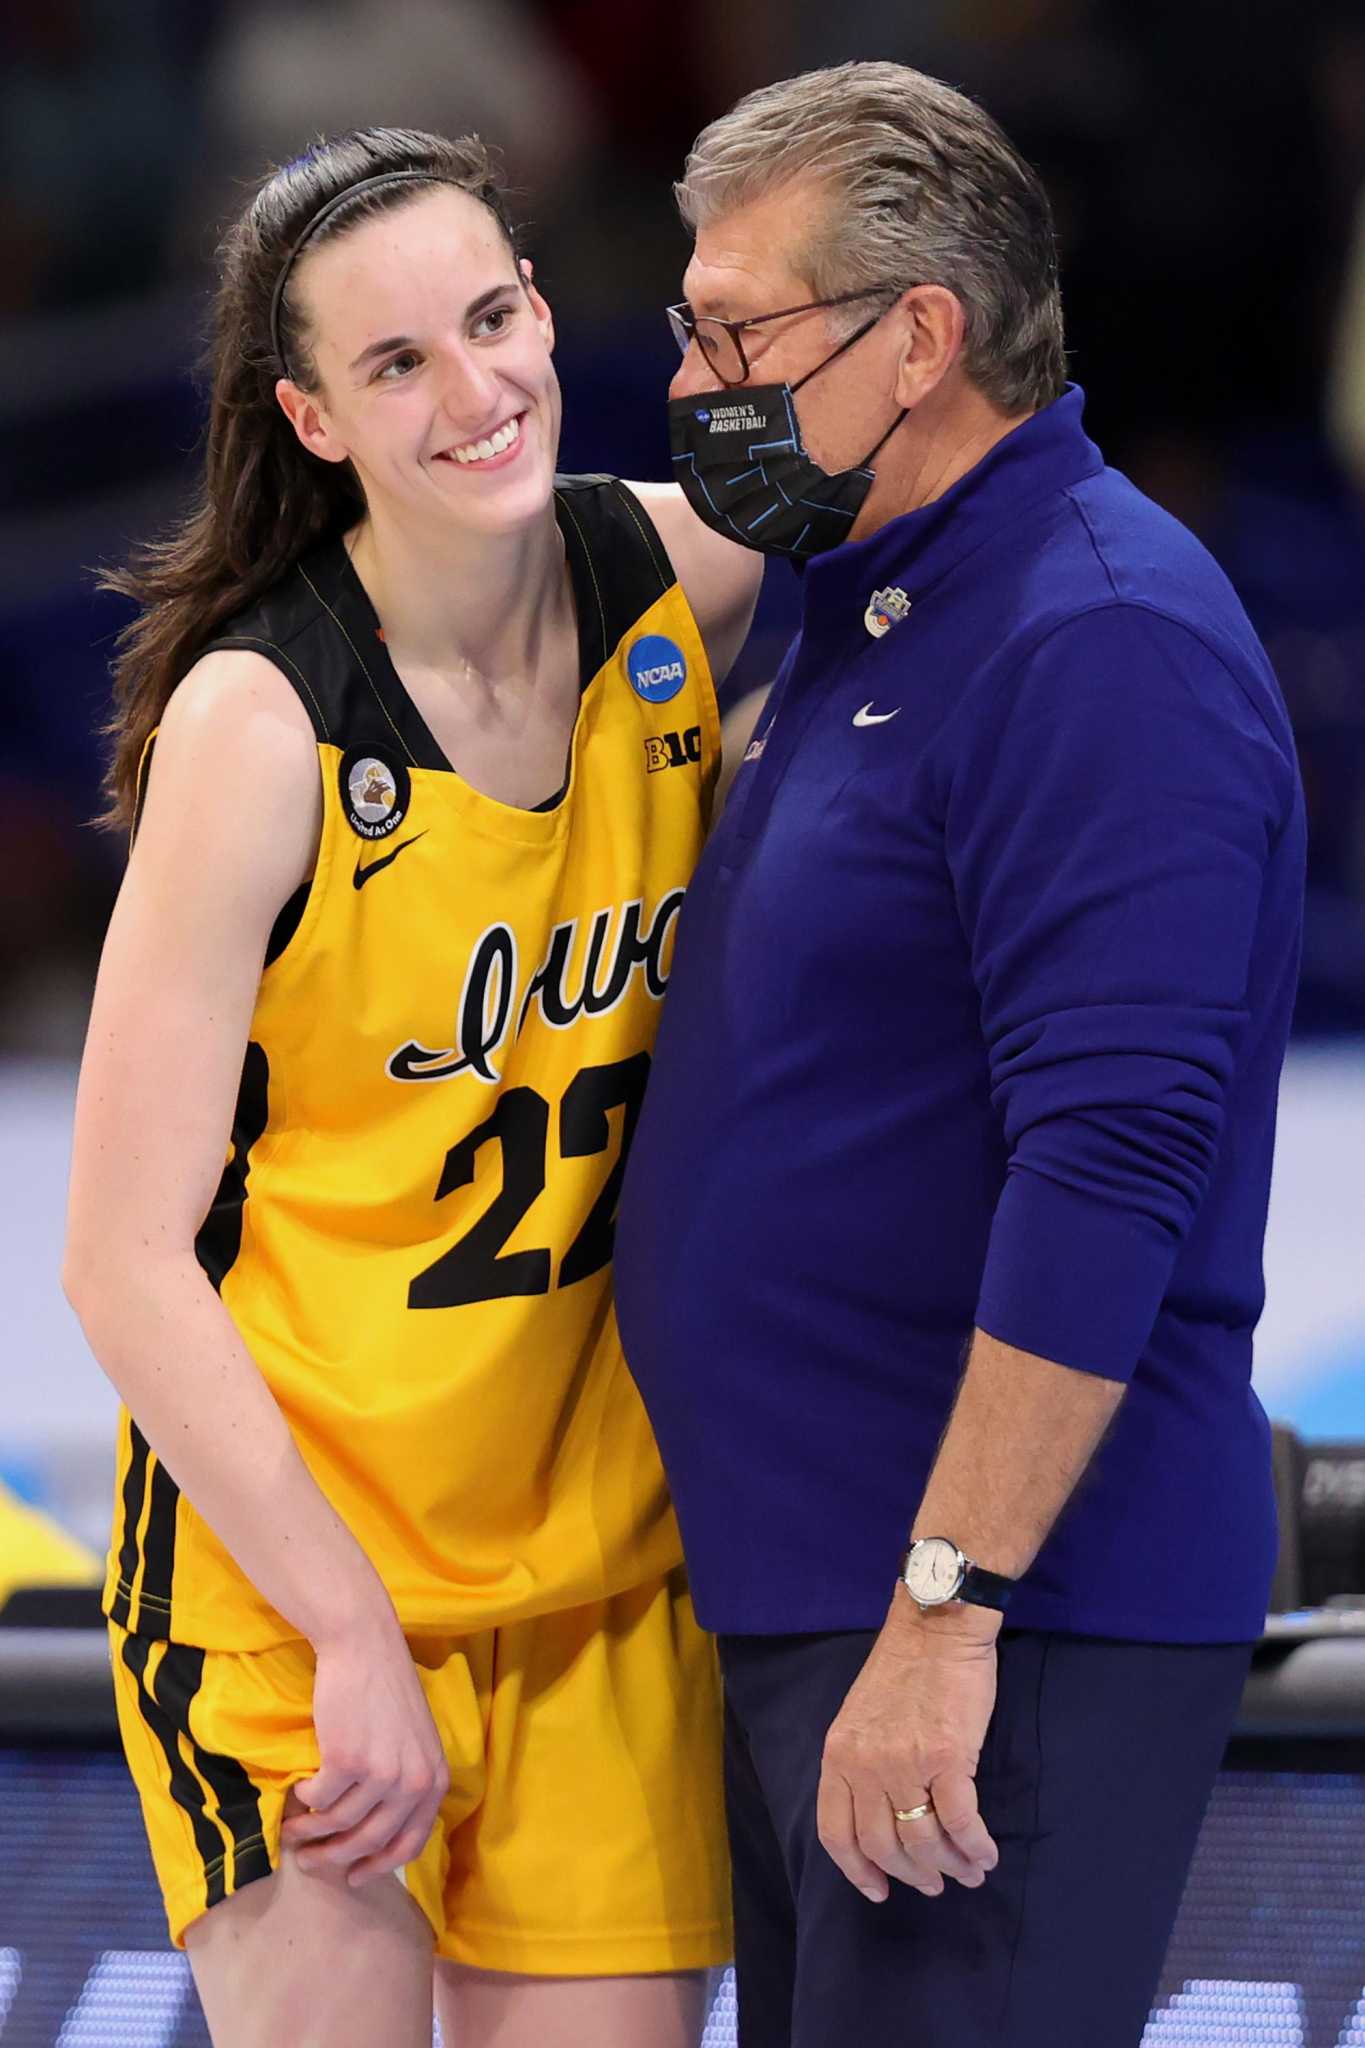 UConn's Geno Auriemma pulled Caitlin Clark aside after the Huskies' win